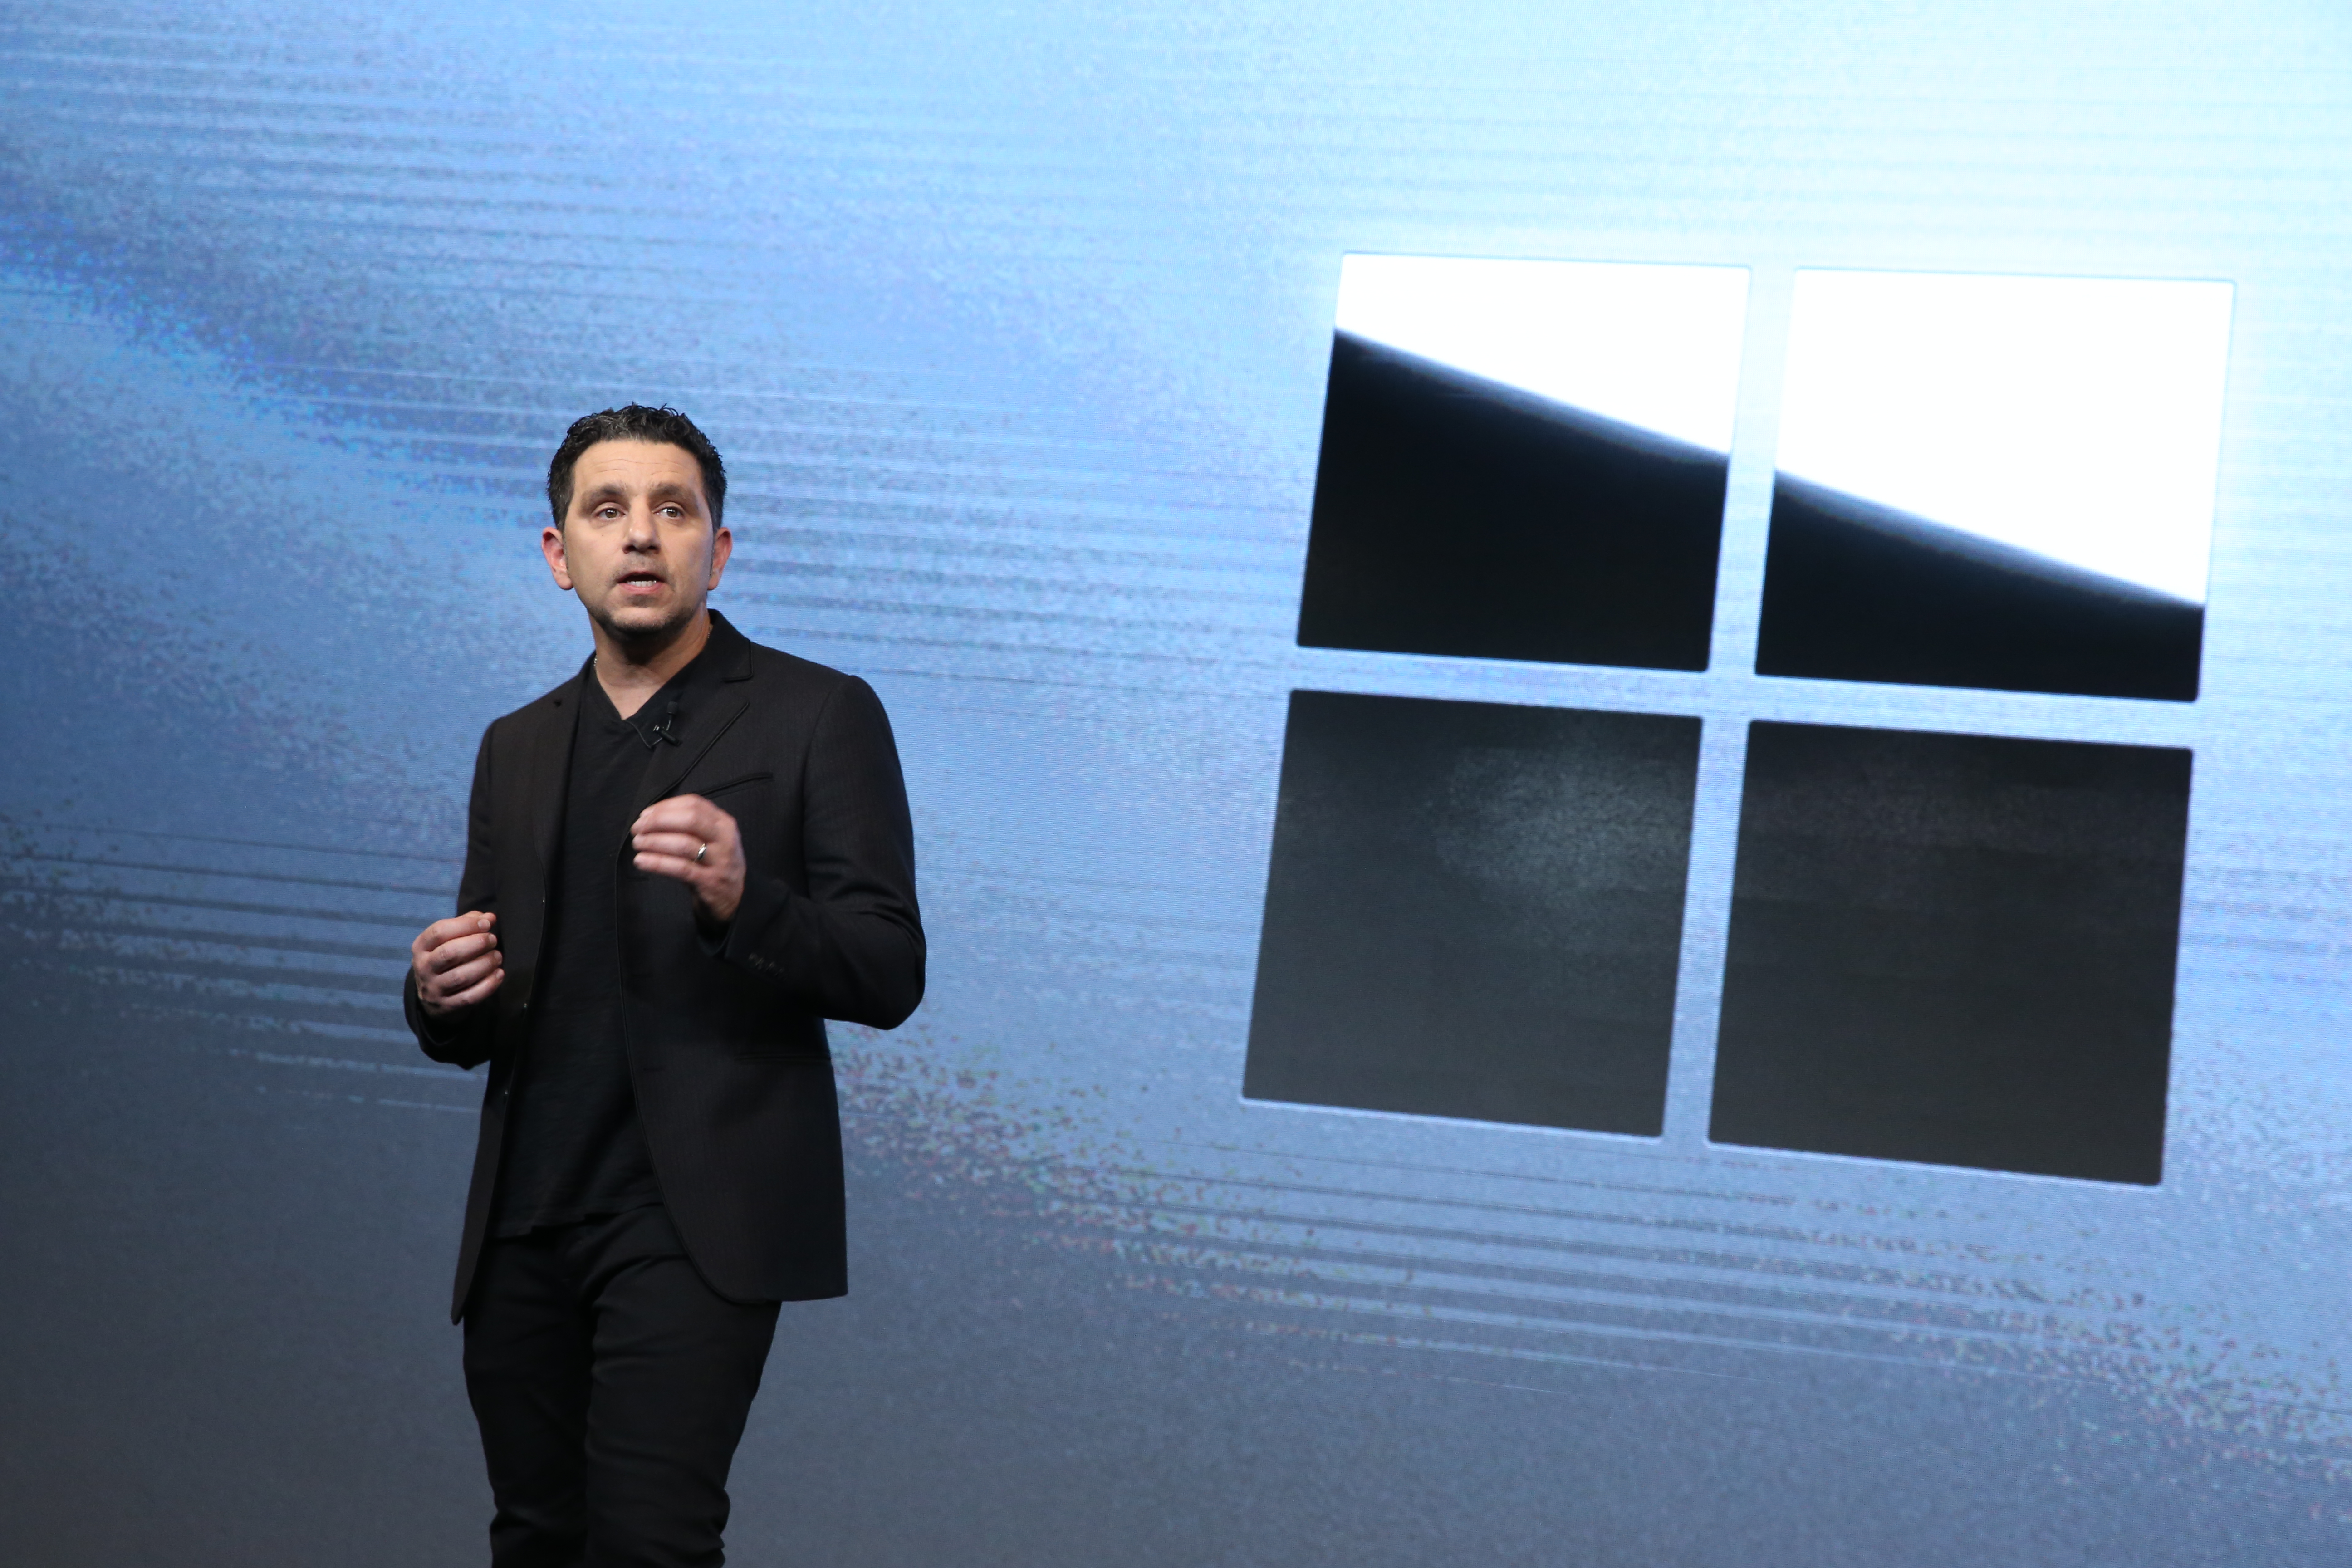 Panos Panay unveils the Surface Pro in China